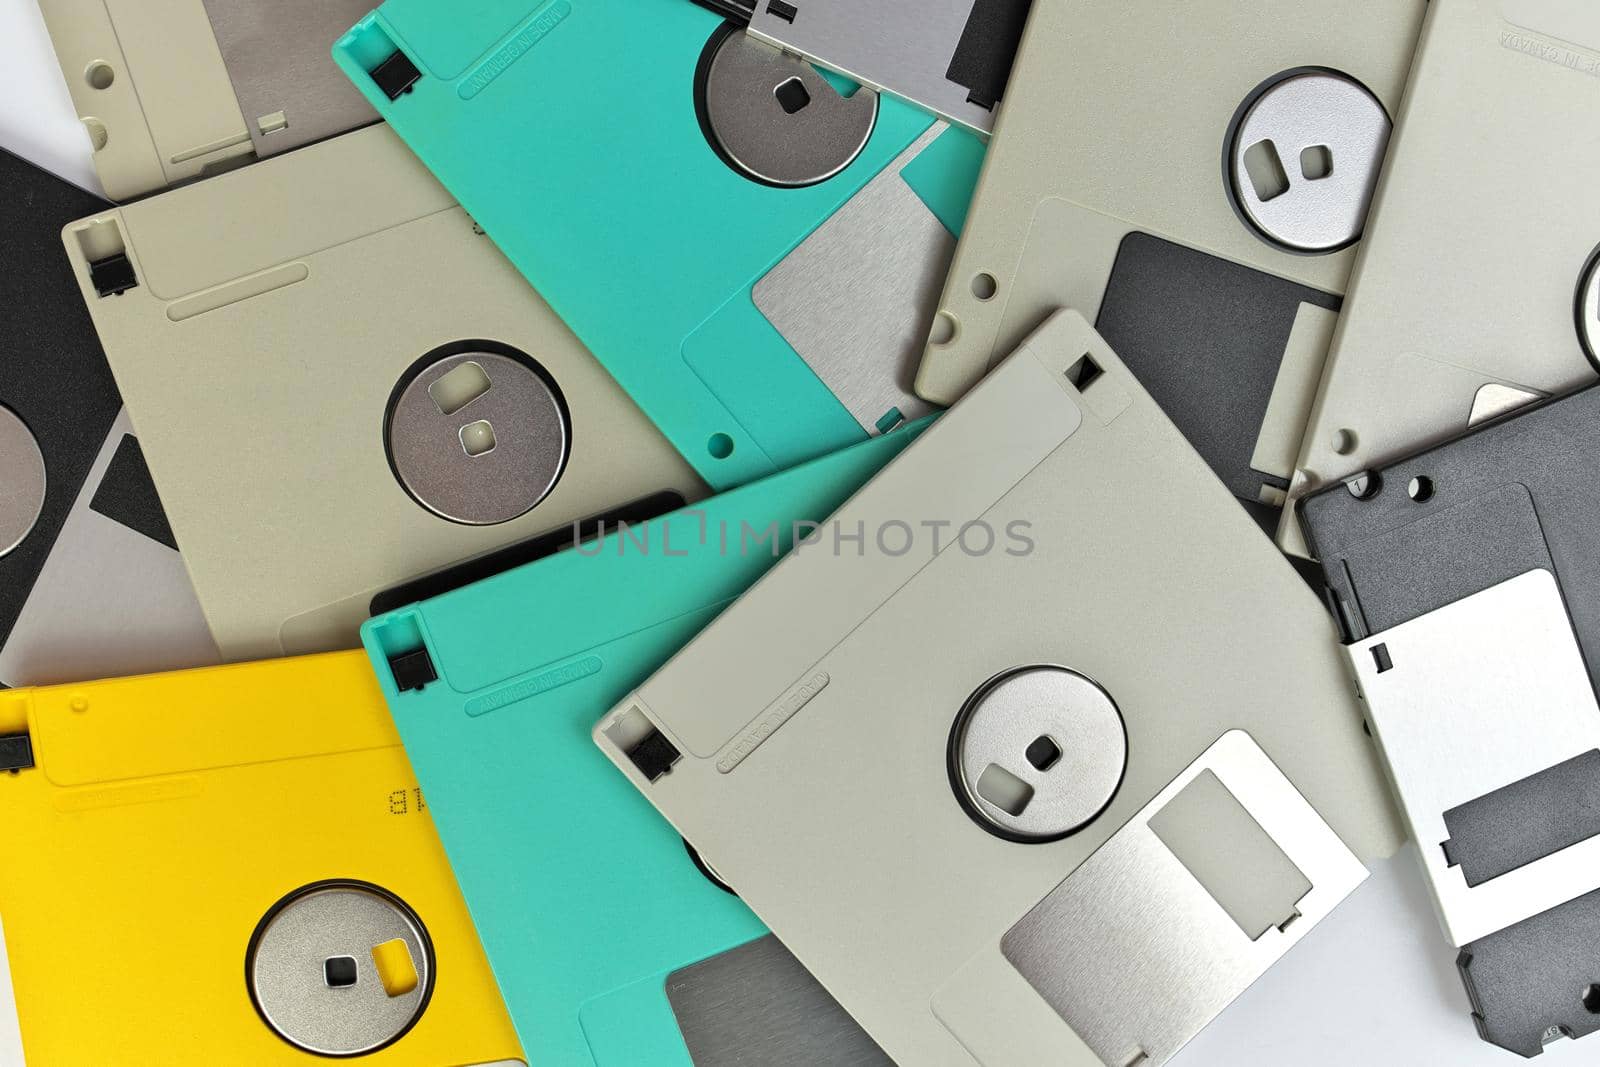 Directly Above Full Frame Close up of 3.5 Inch Floppy disks for background. Retro digital storage technology.